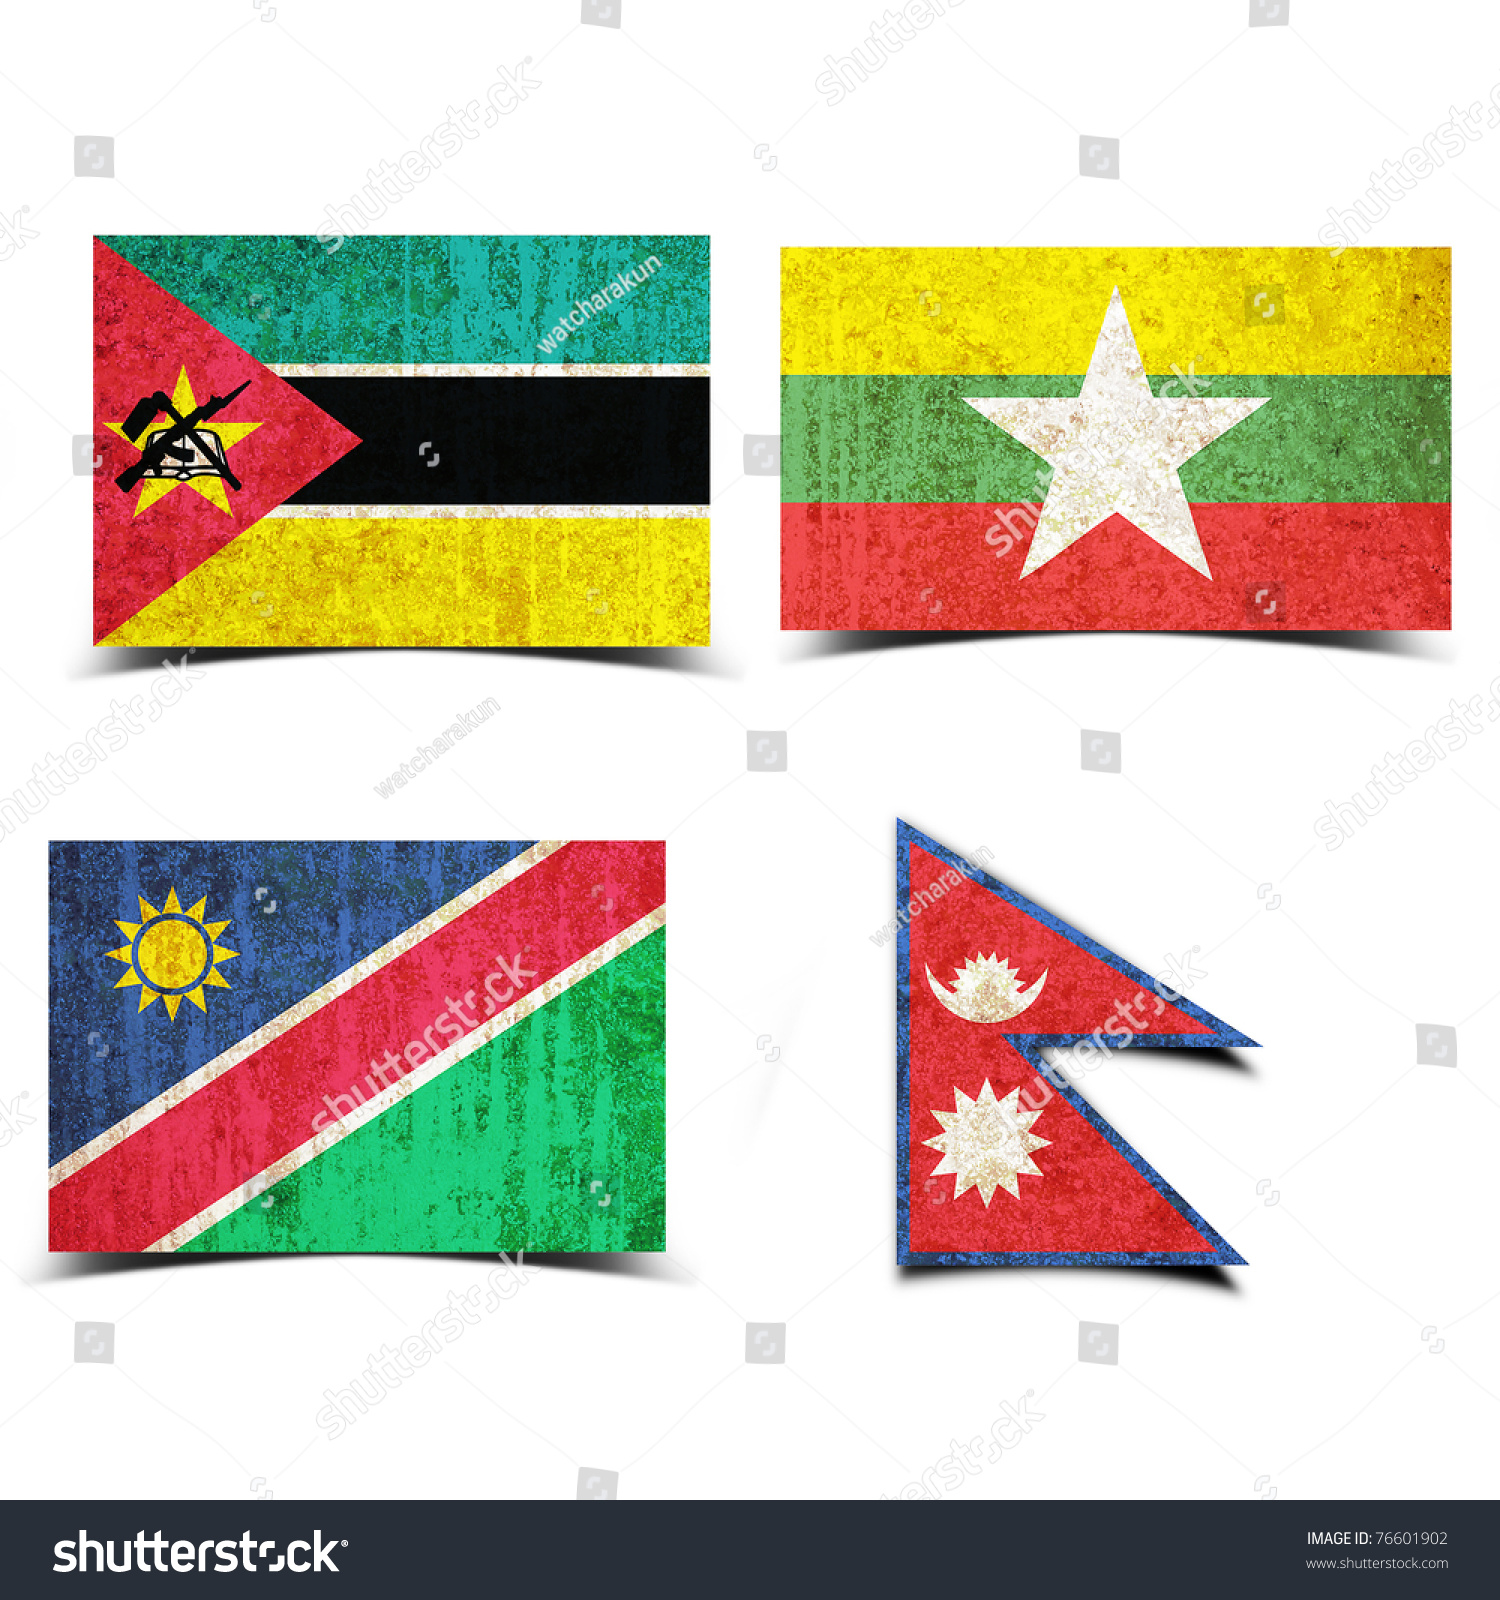 Country Flag Grunge Old Rusty Paper Stock Photo 76601902 - Shutterstock